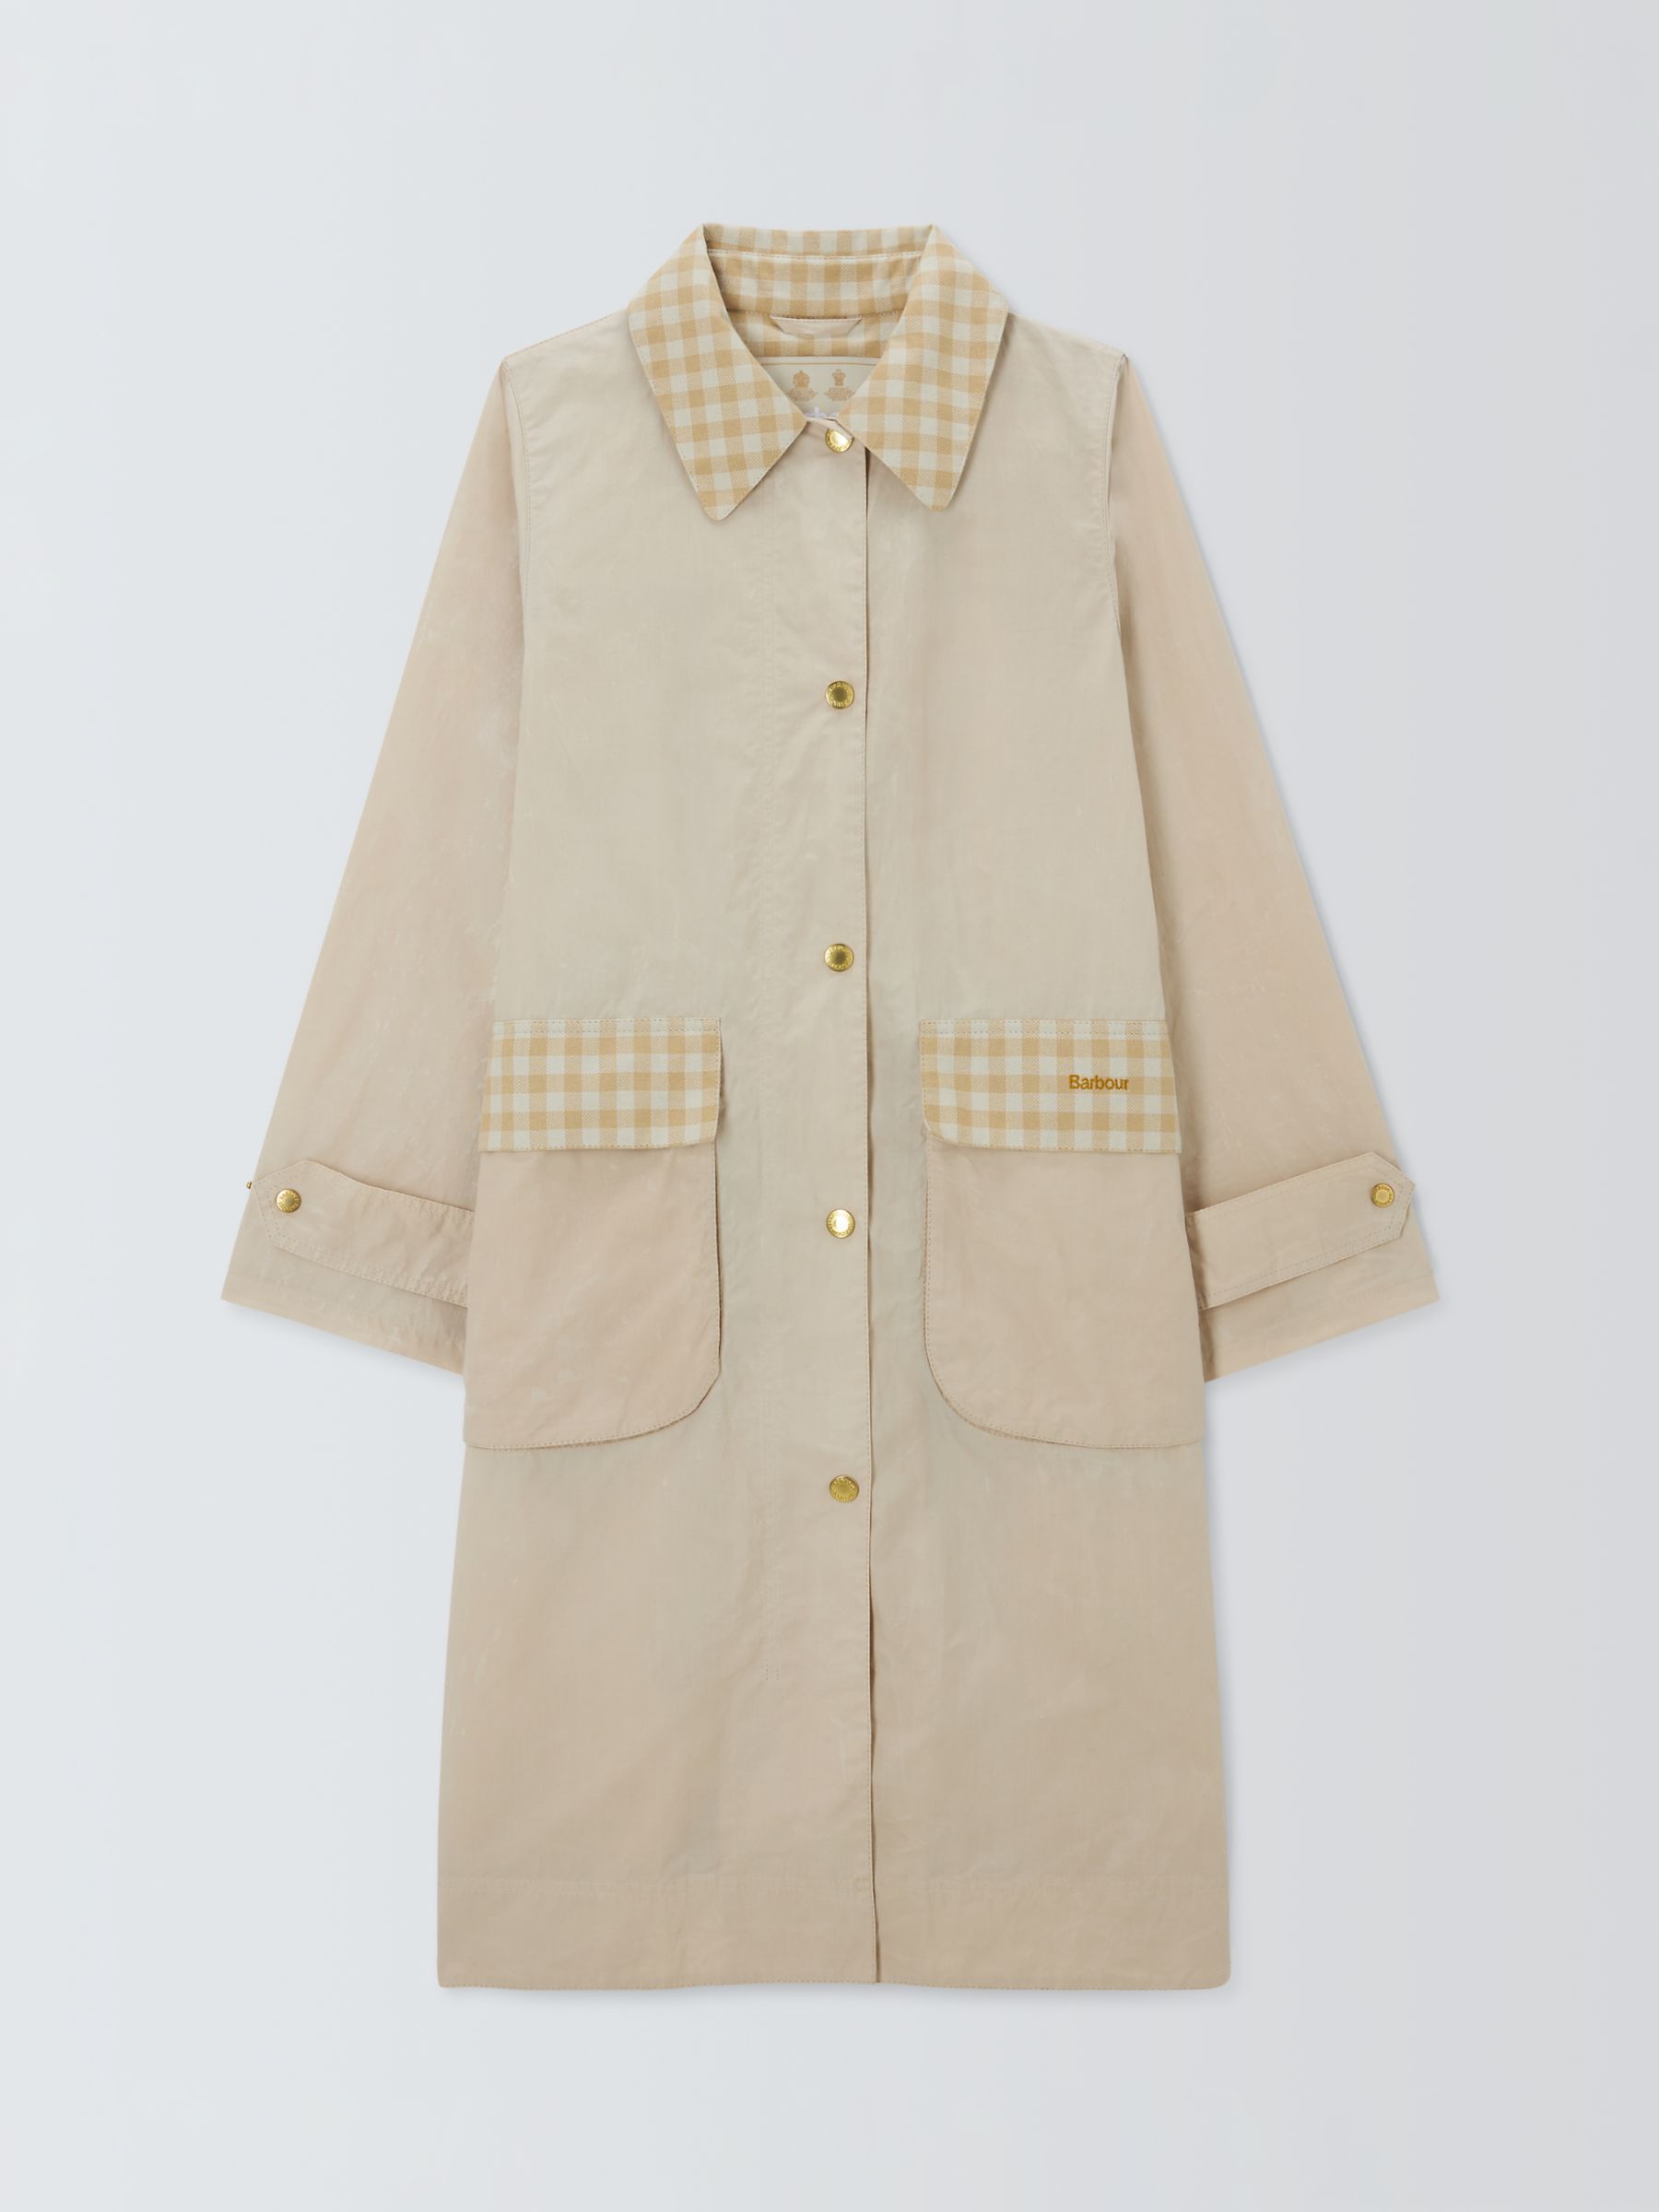 Buy Barbour Tomorrow's Archive Piper Showerproof Jacket, Oatmeal Online at johnlewis.com